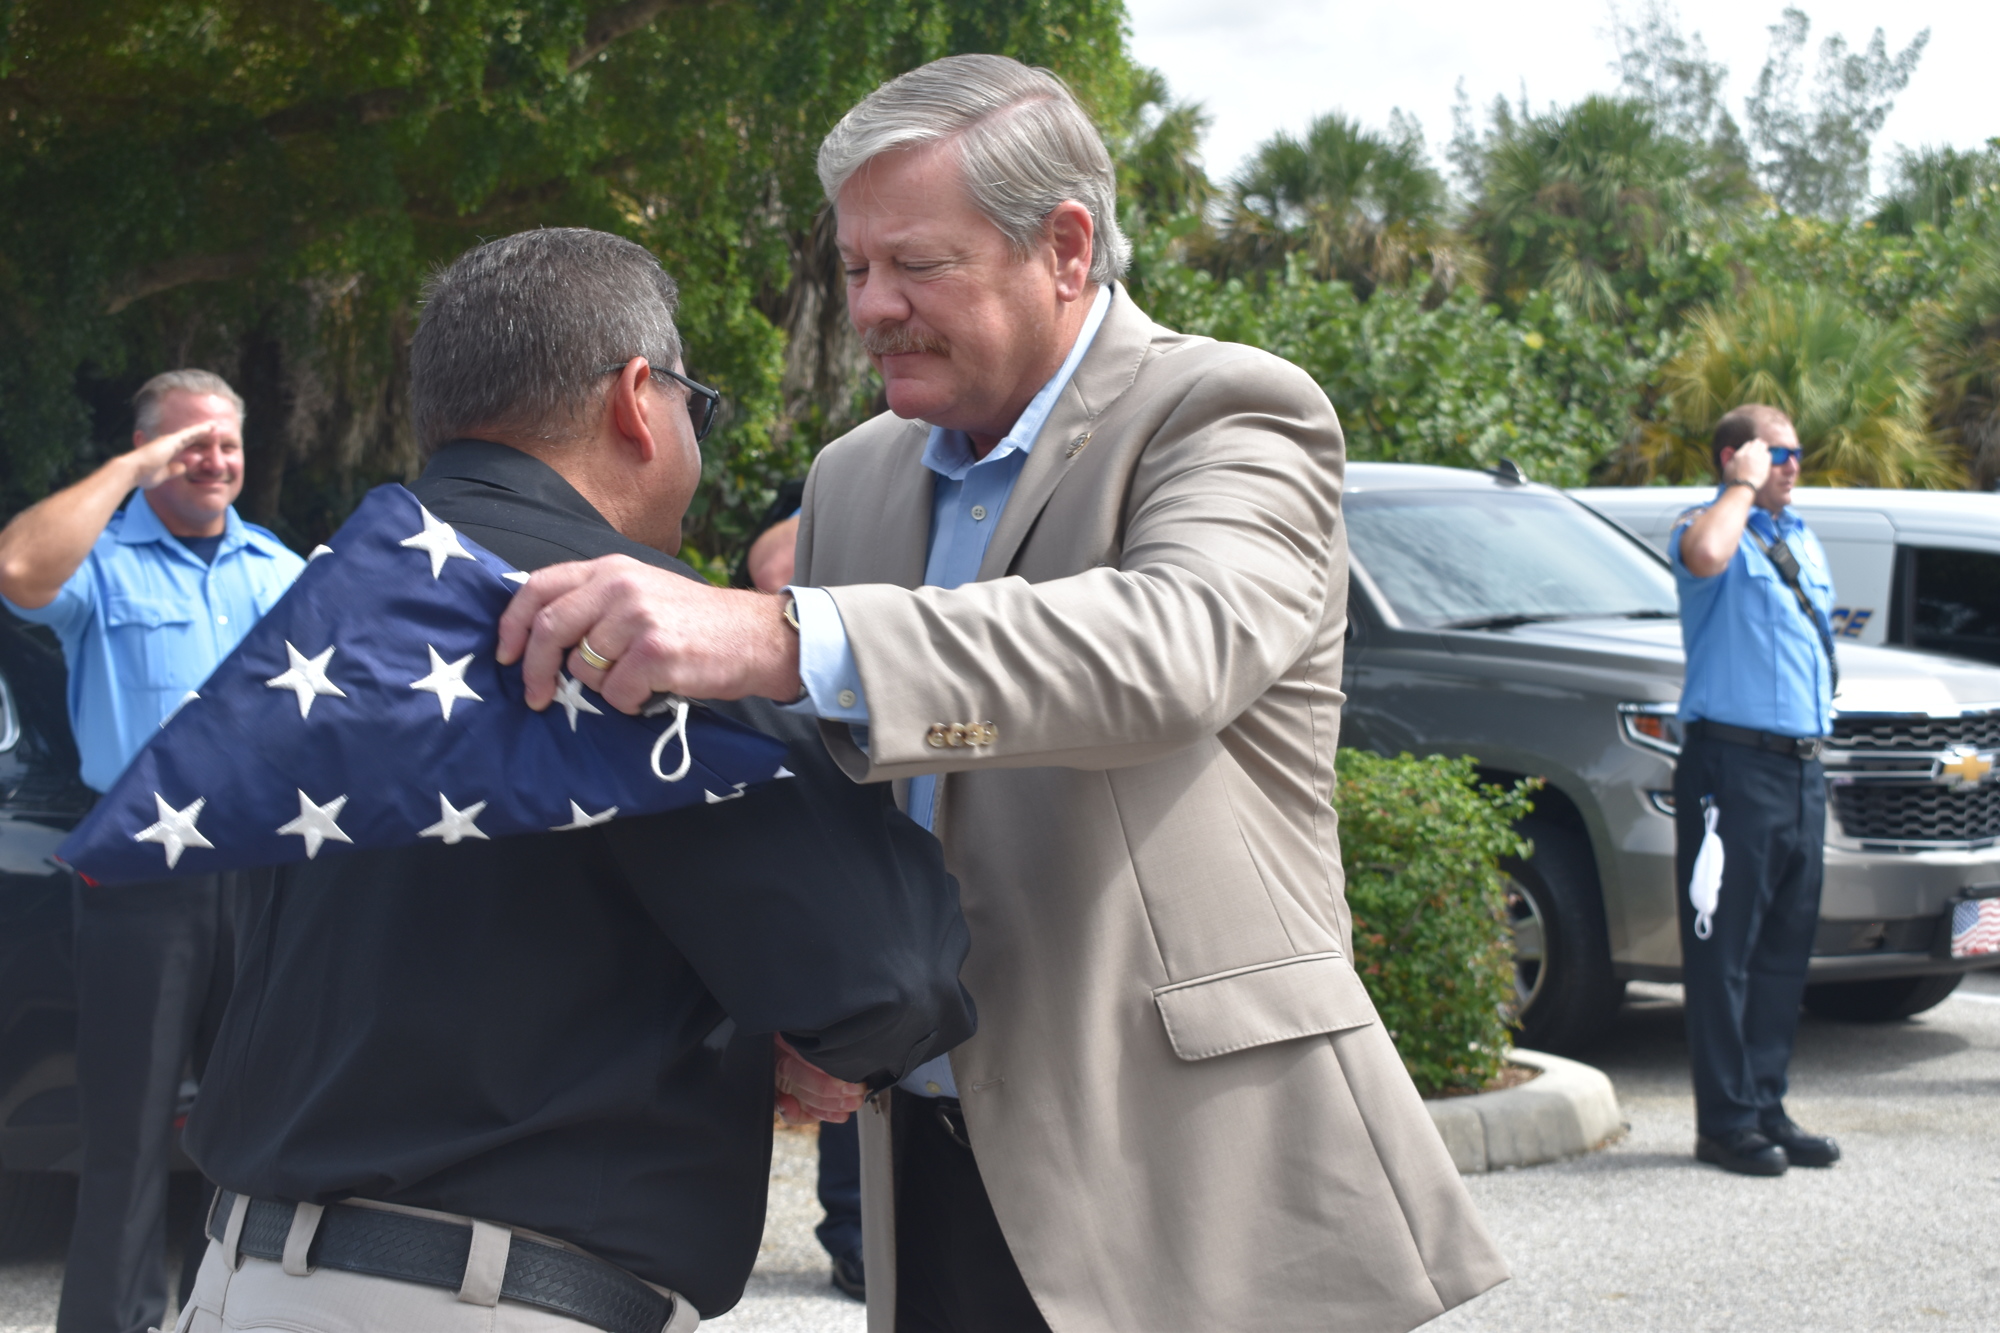 Deputy Police Chief Frank Rubino presented retiring Police Chief Pete Cumming with an American flag on Friday afternoon.